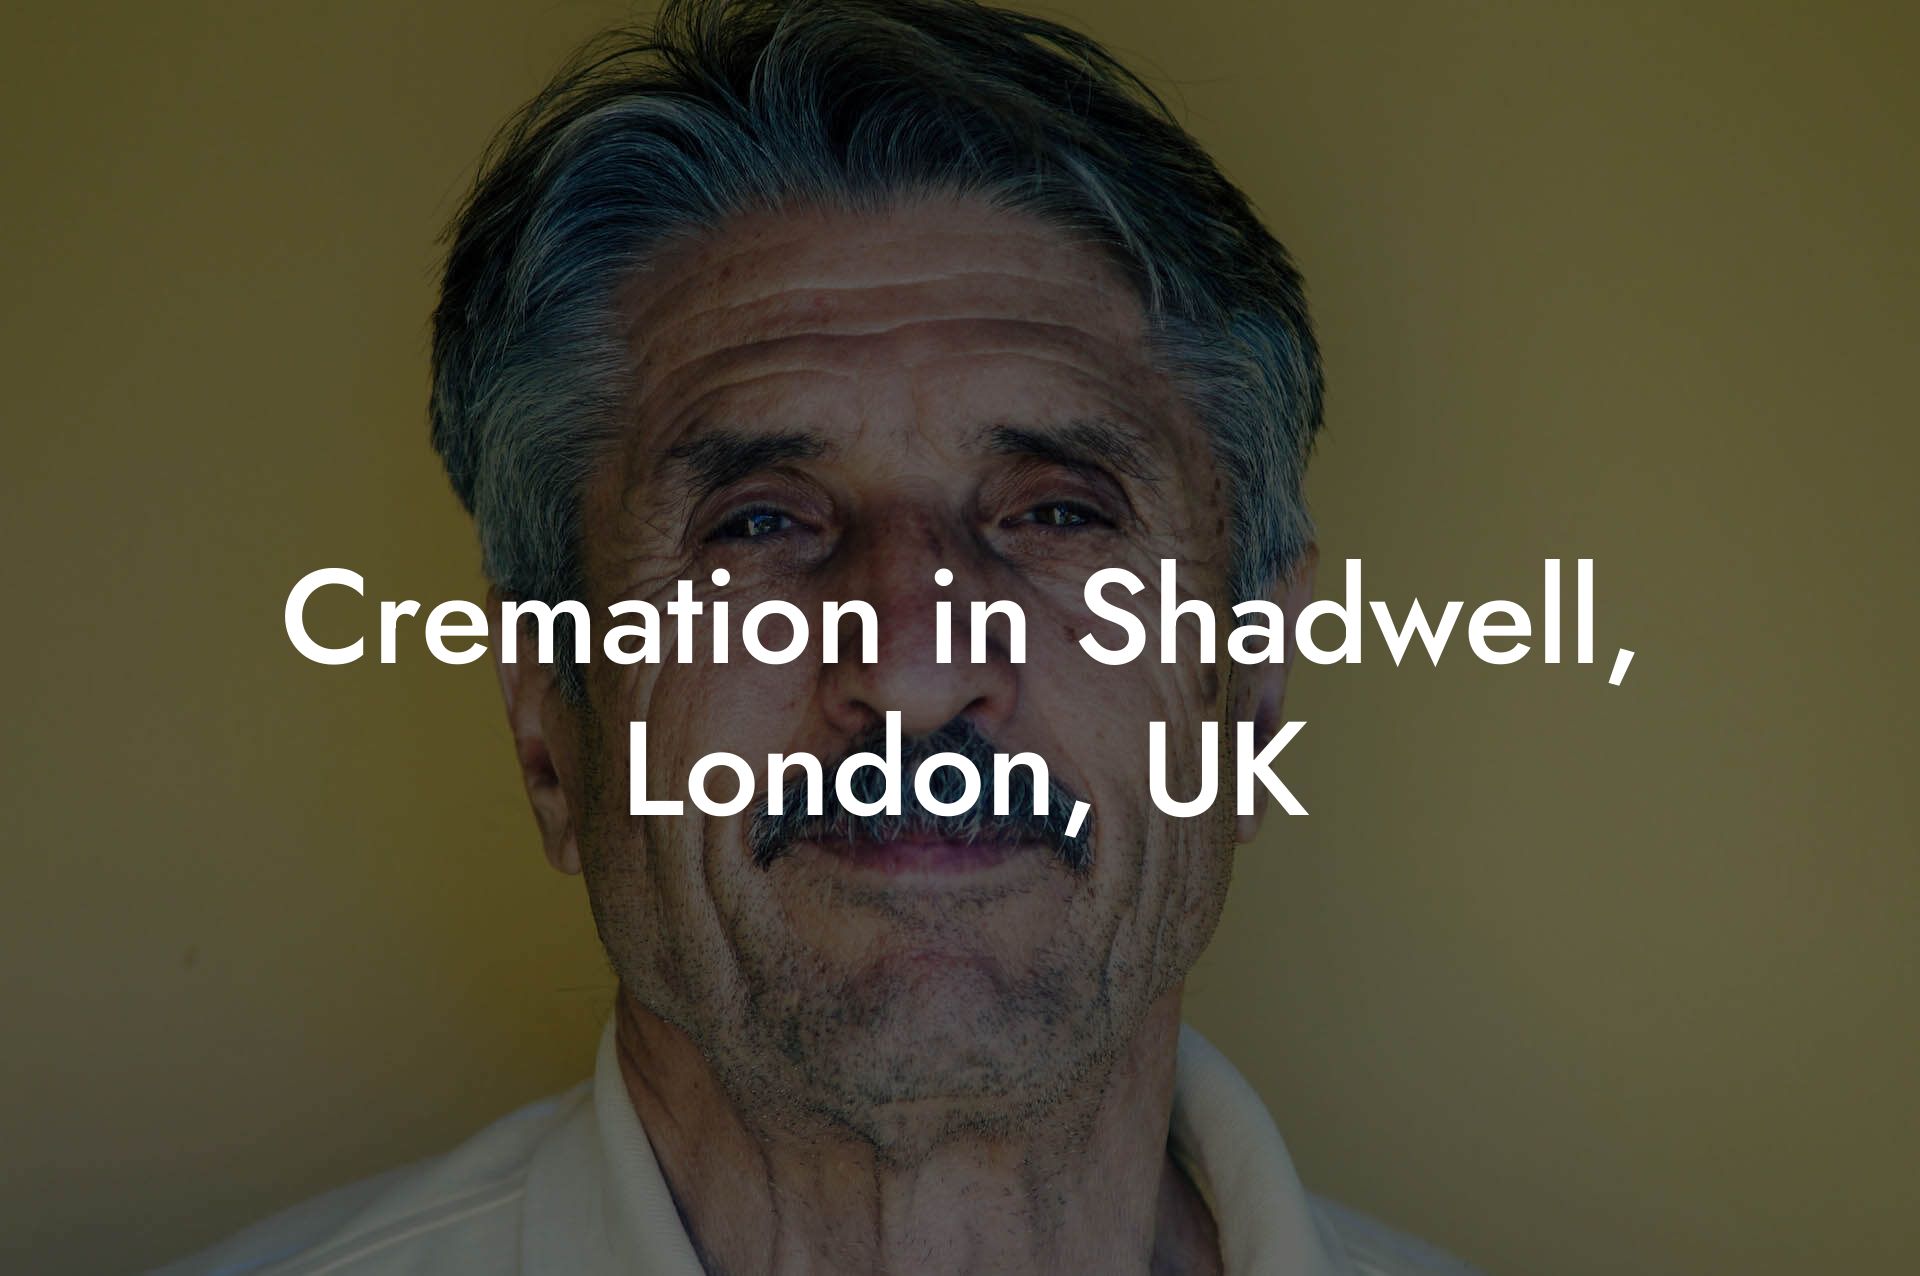 Cremation in Shadwell, London, UK